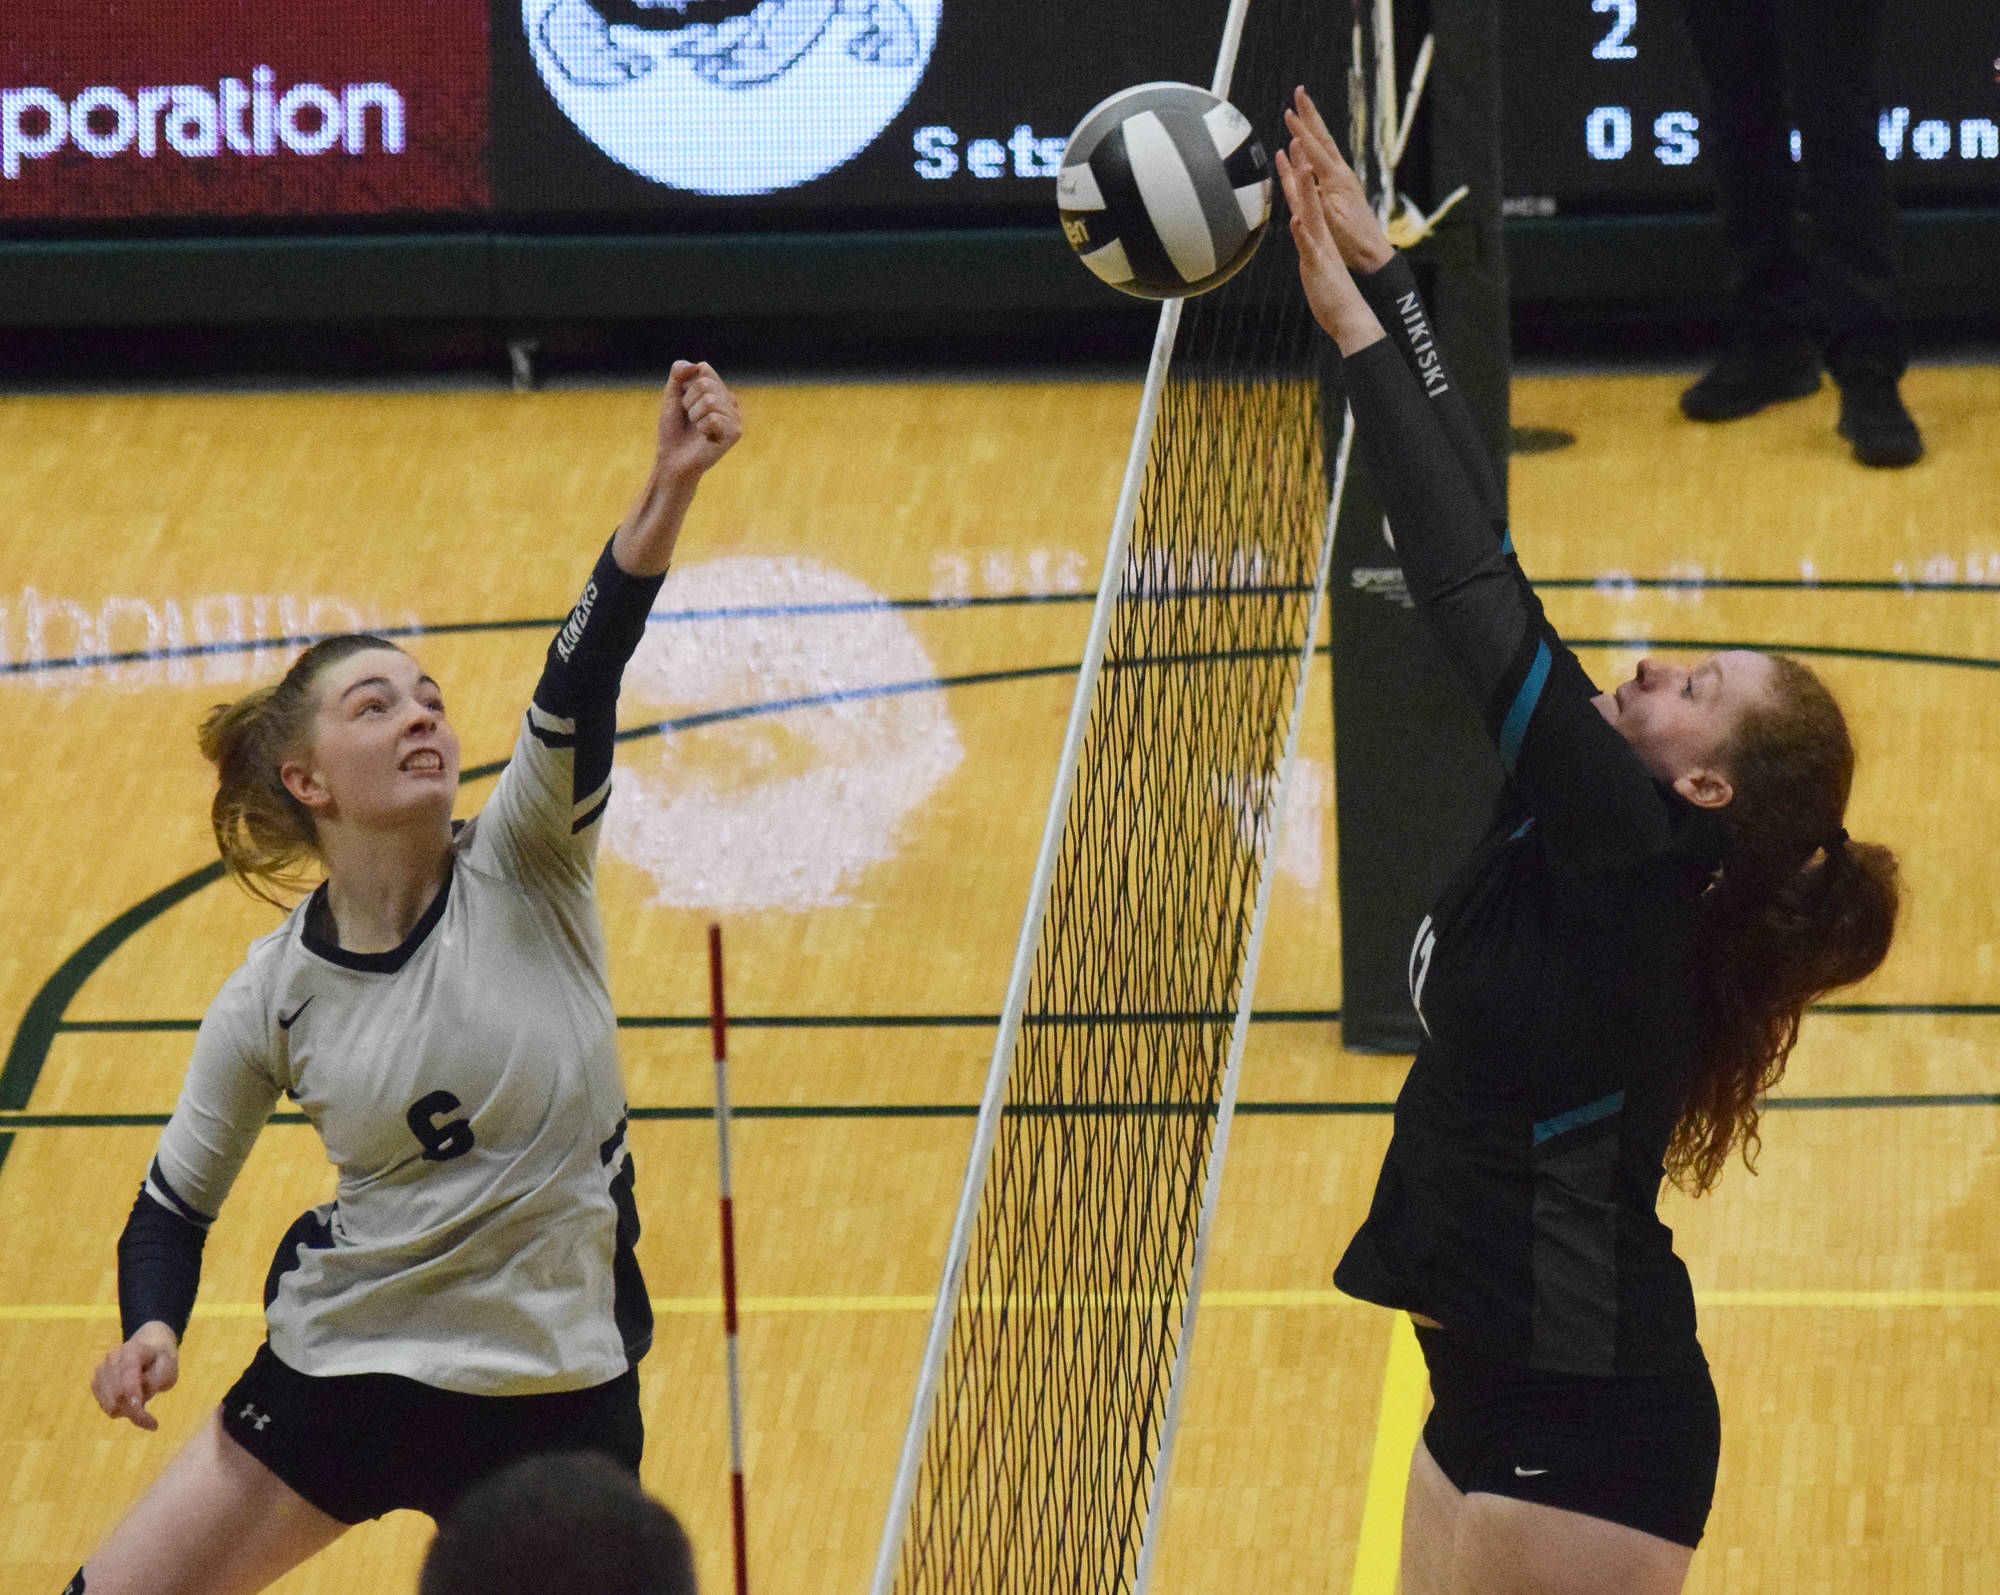 Homer’s Karmyn Gallios (left) punches the ball against Nikiski’s Kaycee Bostic, Thursday, Nov. 14, 2019, at the Class 3A state volleyball tournament at the Alaska Airlines Center in Anchorage, Alaska. (Photo by Joey Klecka/Peninsula Clarion)